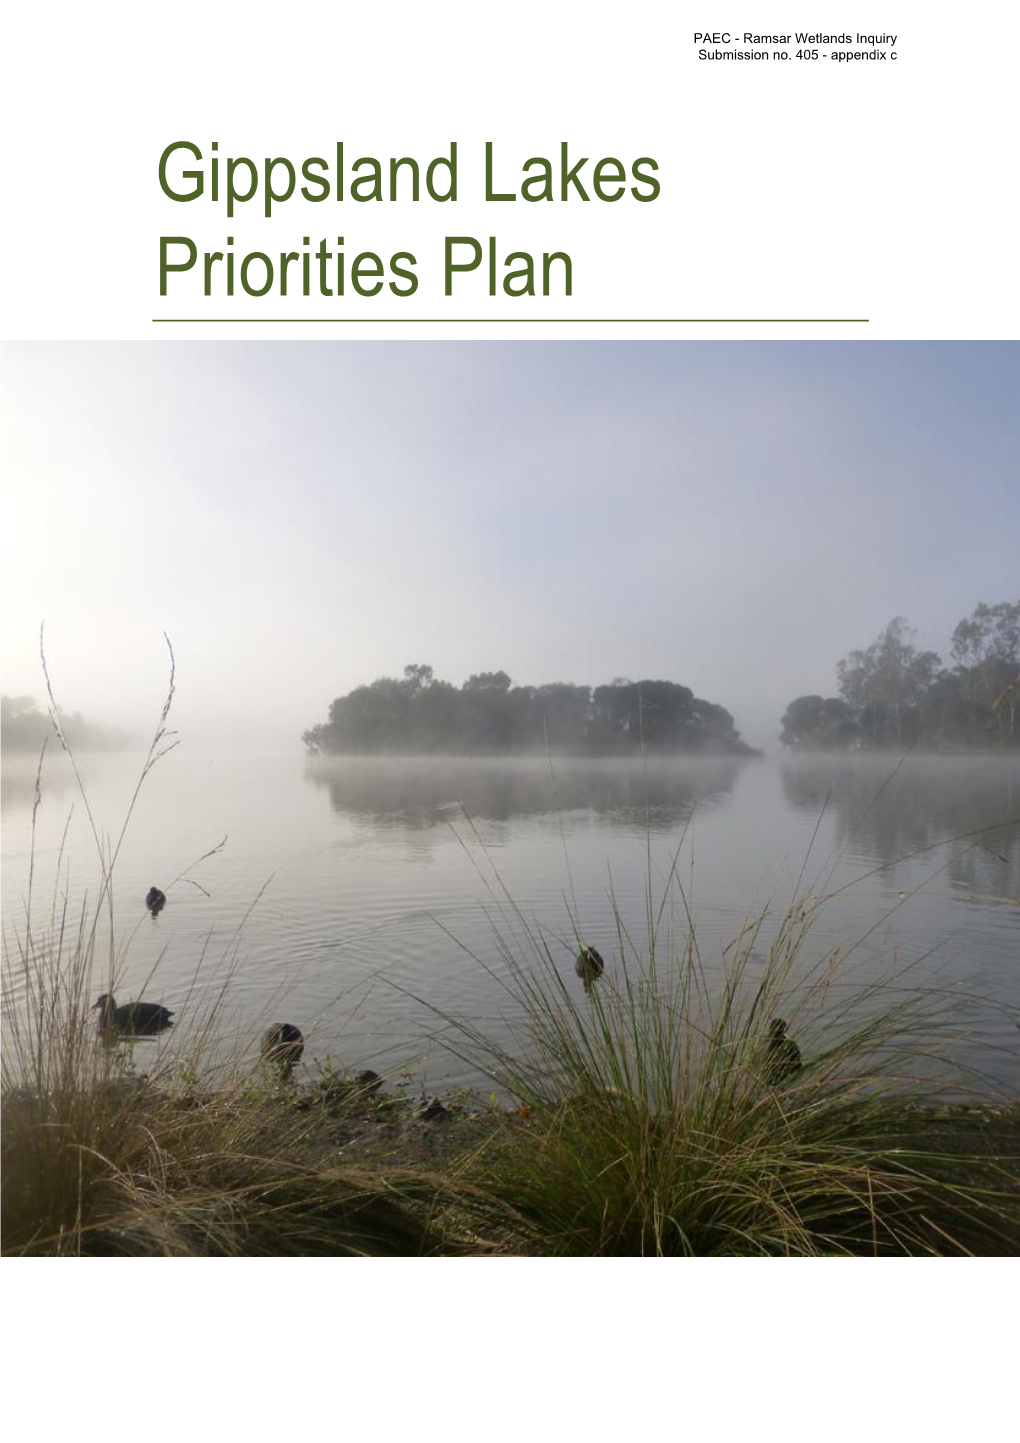 Gippsland Lakes Priorities Plan PAEC - Ramsar Wetlands Inquiry Submission No